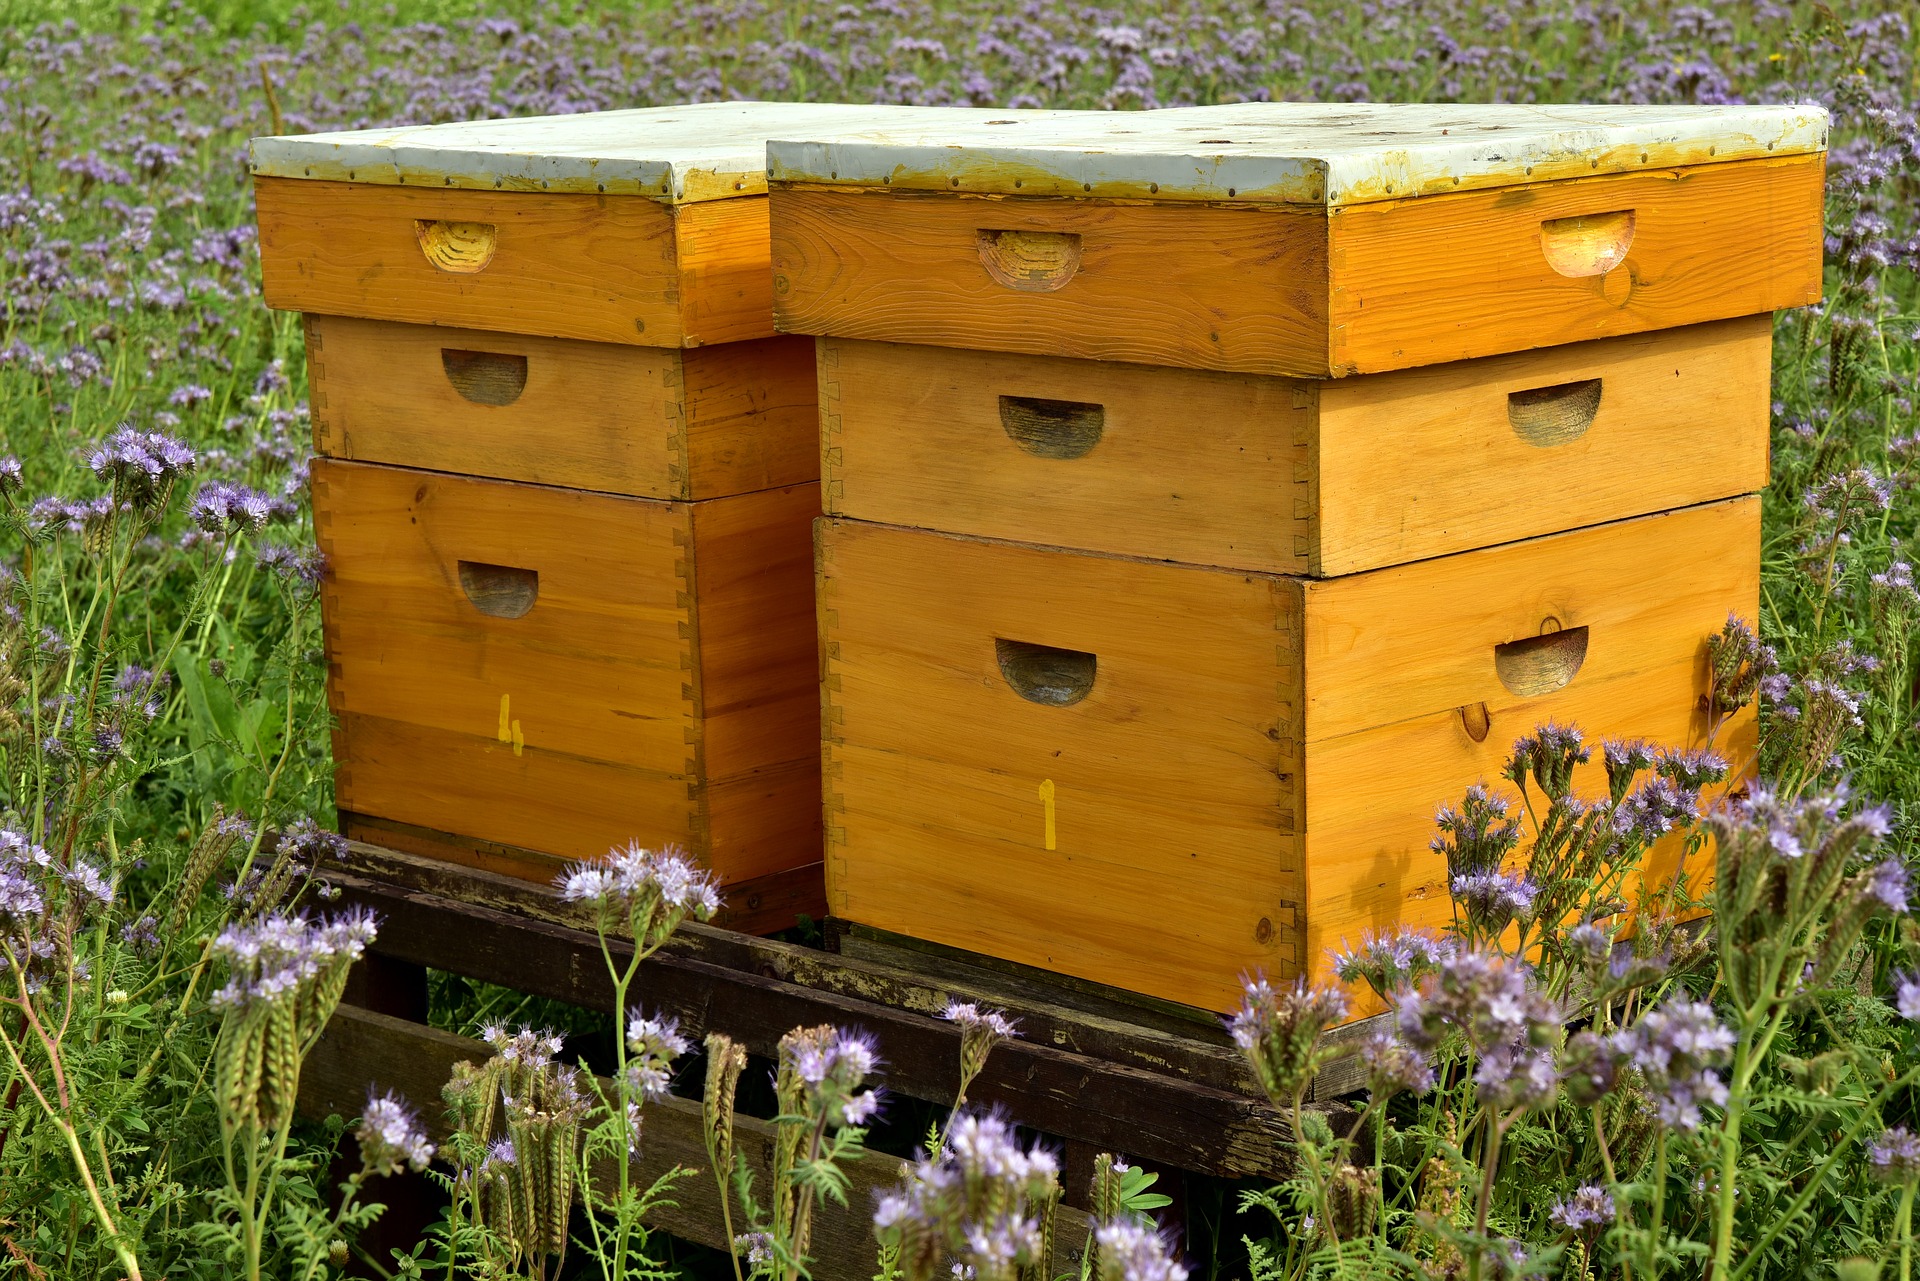 3 Best Types Of Beehives Langstroth Top Bar And Warre Beekeeping 101 The Old Farmer S Almanac,How To Cook Ribs On A Gas Grill With A Rib Rack